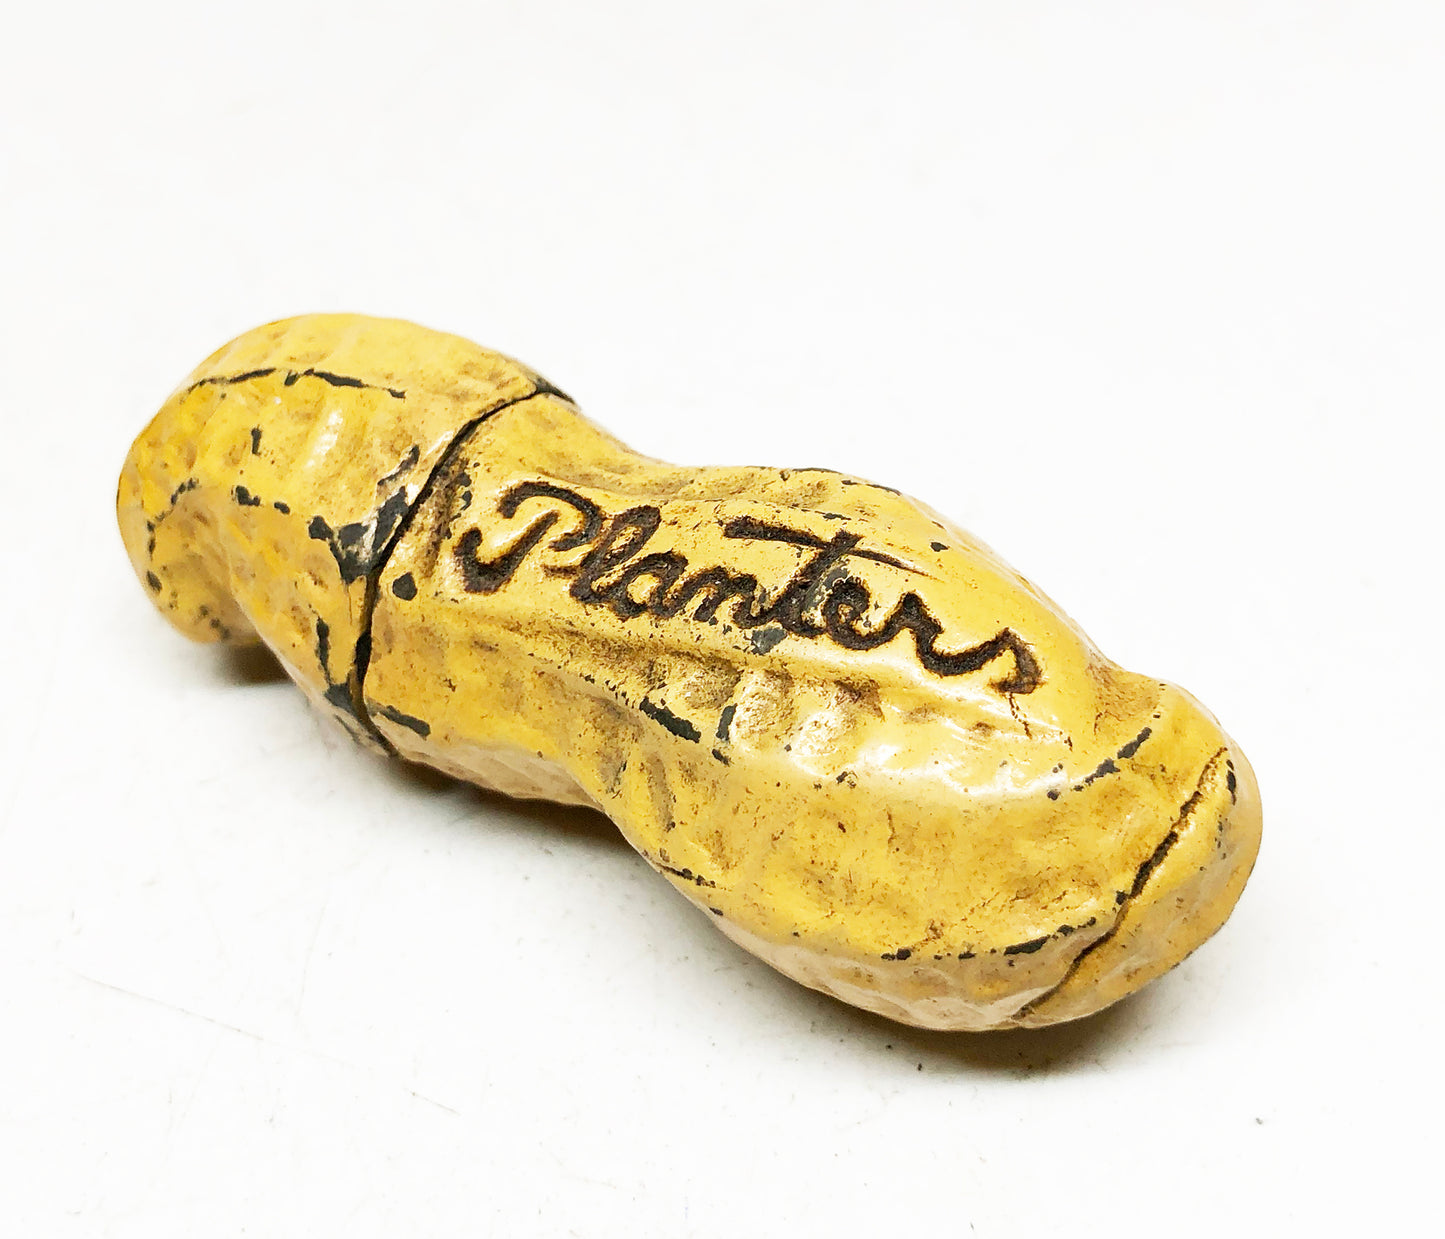 Planters Peanuts 1920s Figural Advertising Lighter